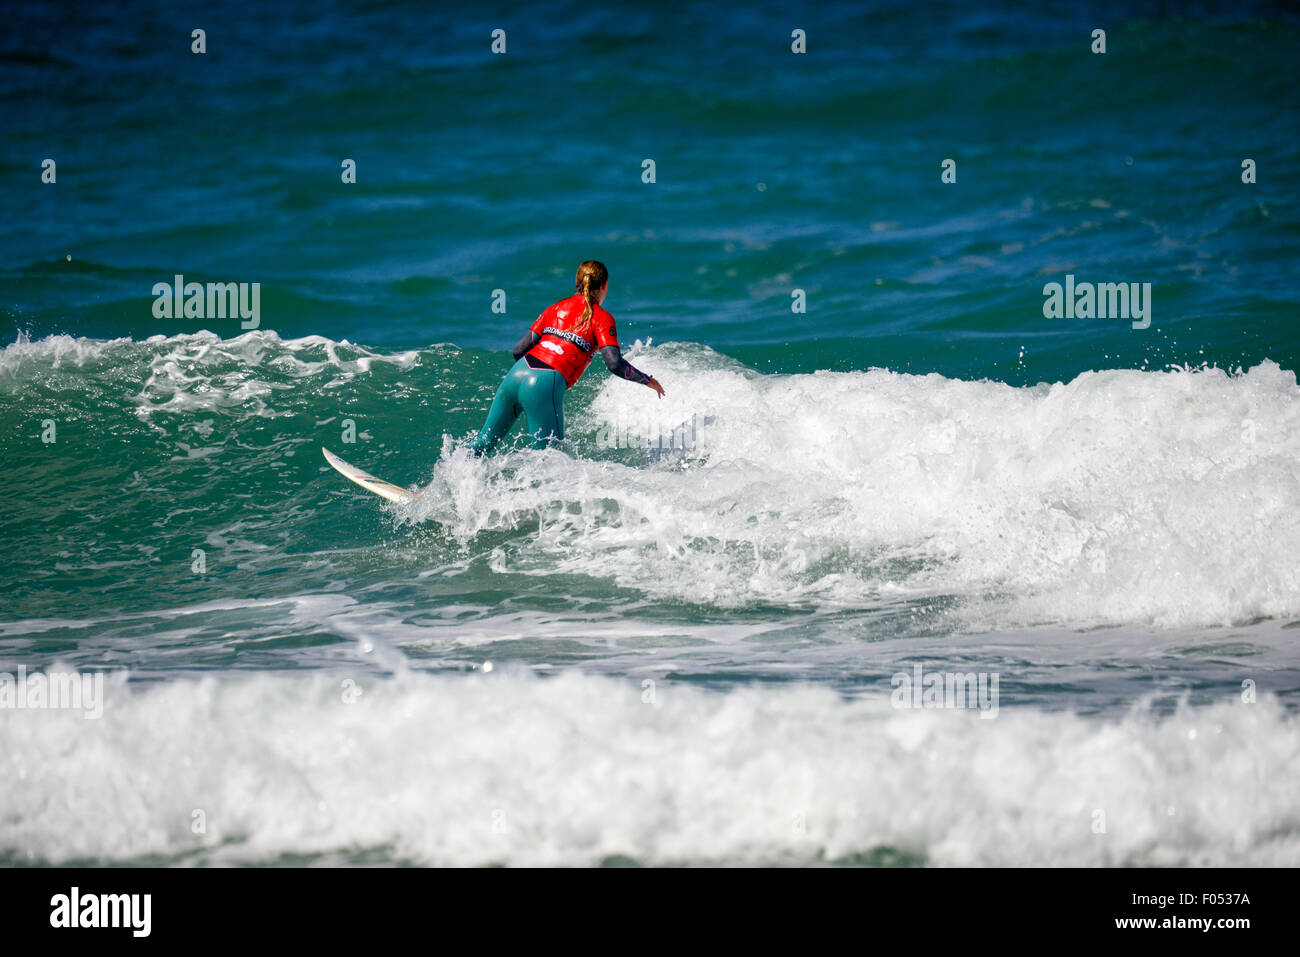 Boardmasters 2015 has officially kicked off! Cornwall’s own surf and music festival got underway today at surfing mecca, Fistral Beach with day one of the International Surf Competiitons. Stock Photo